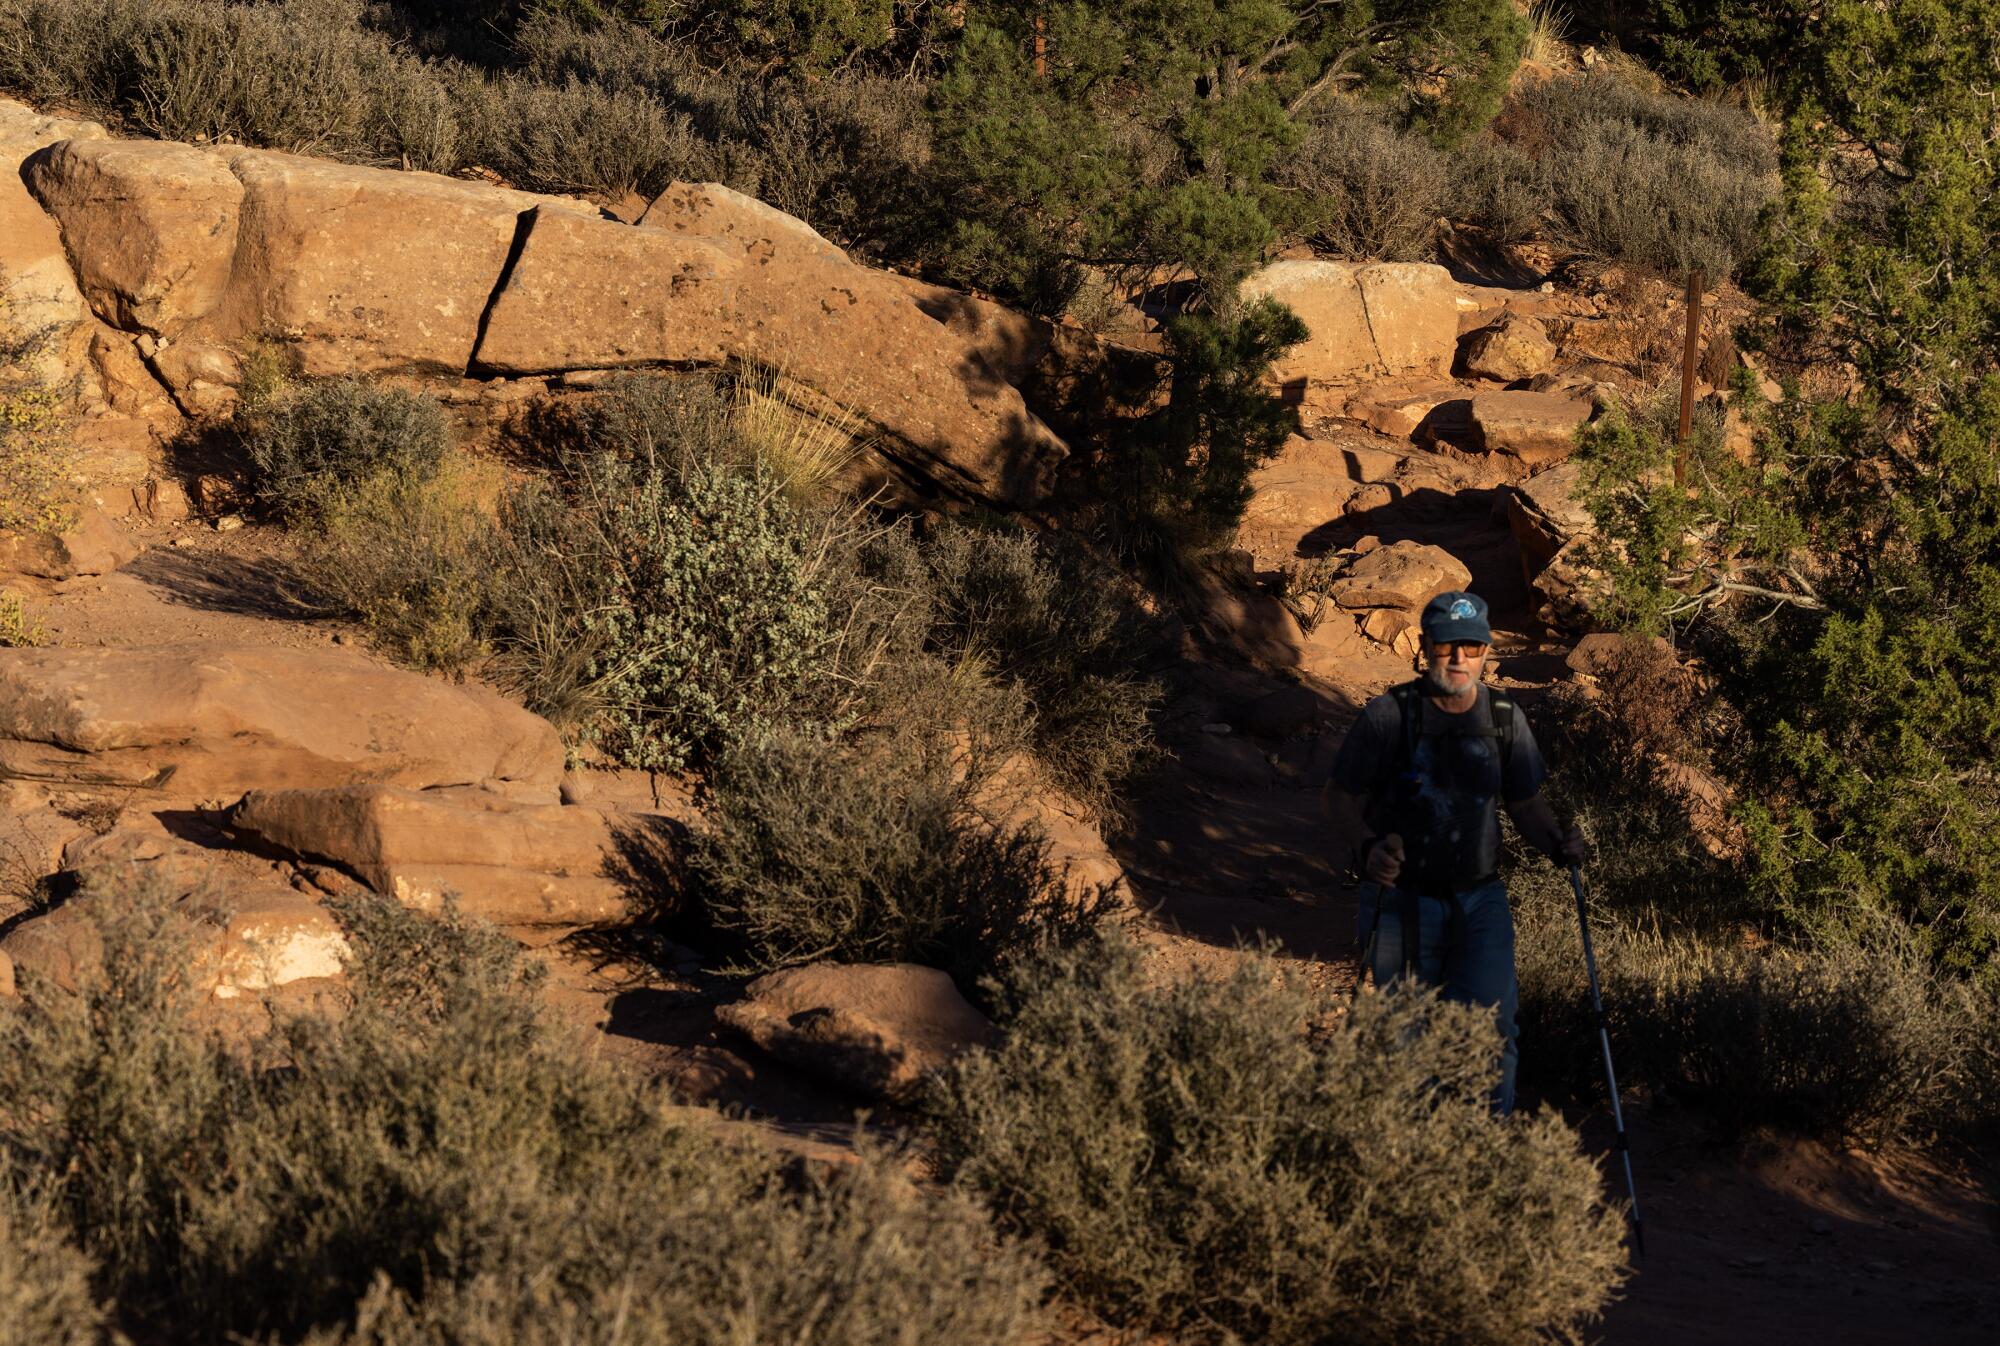 Dave Hasenauer hikes along the Watchman Trail during Atheist Adventure.